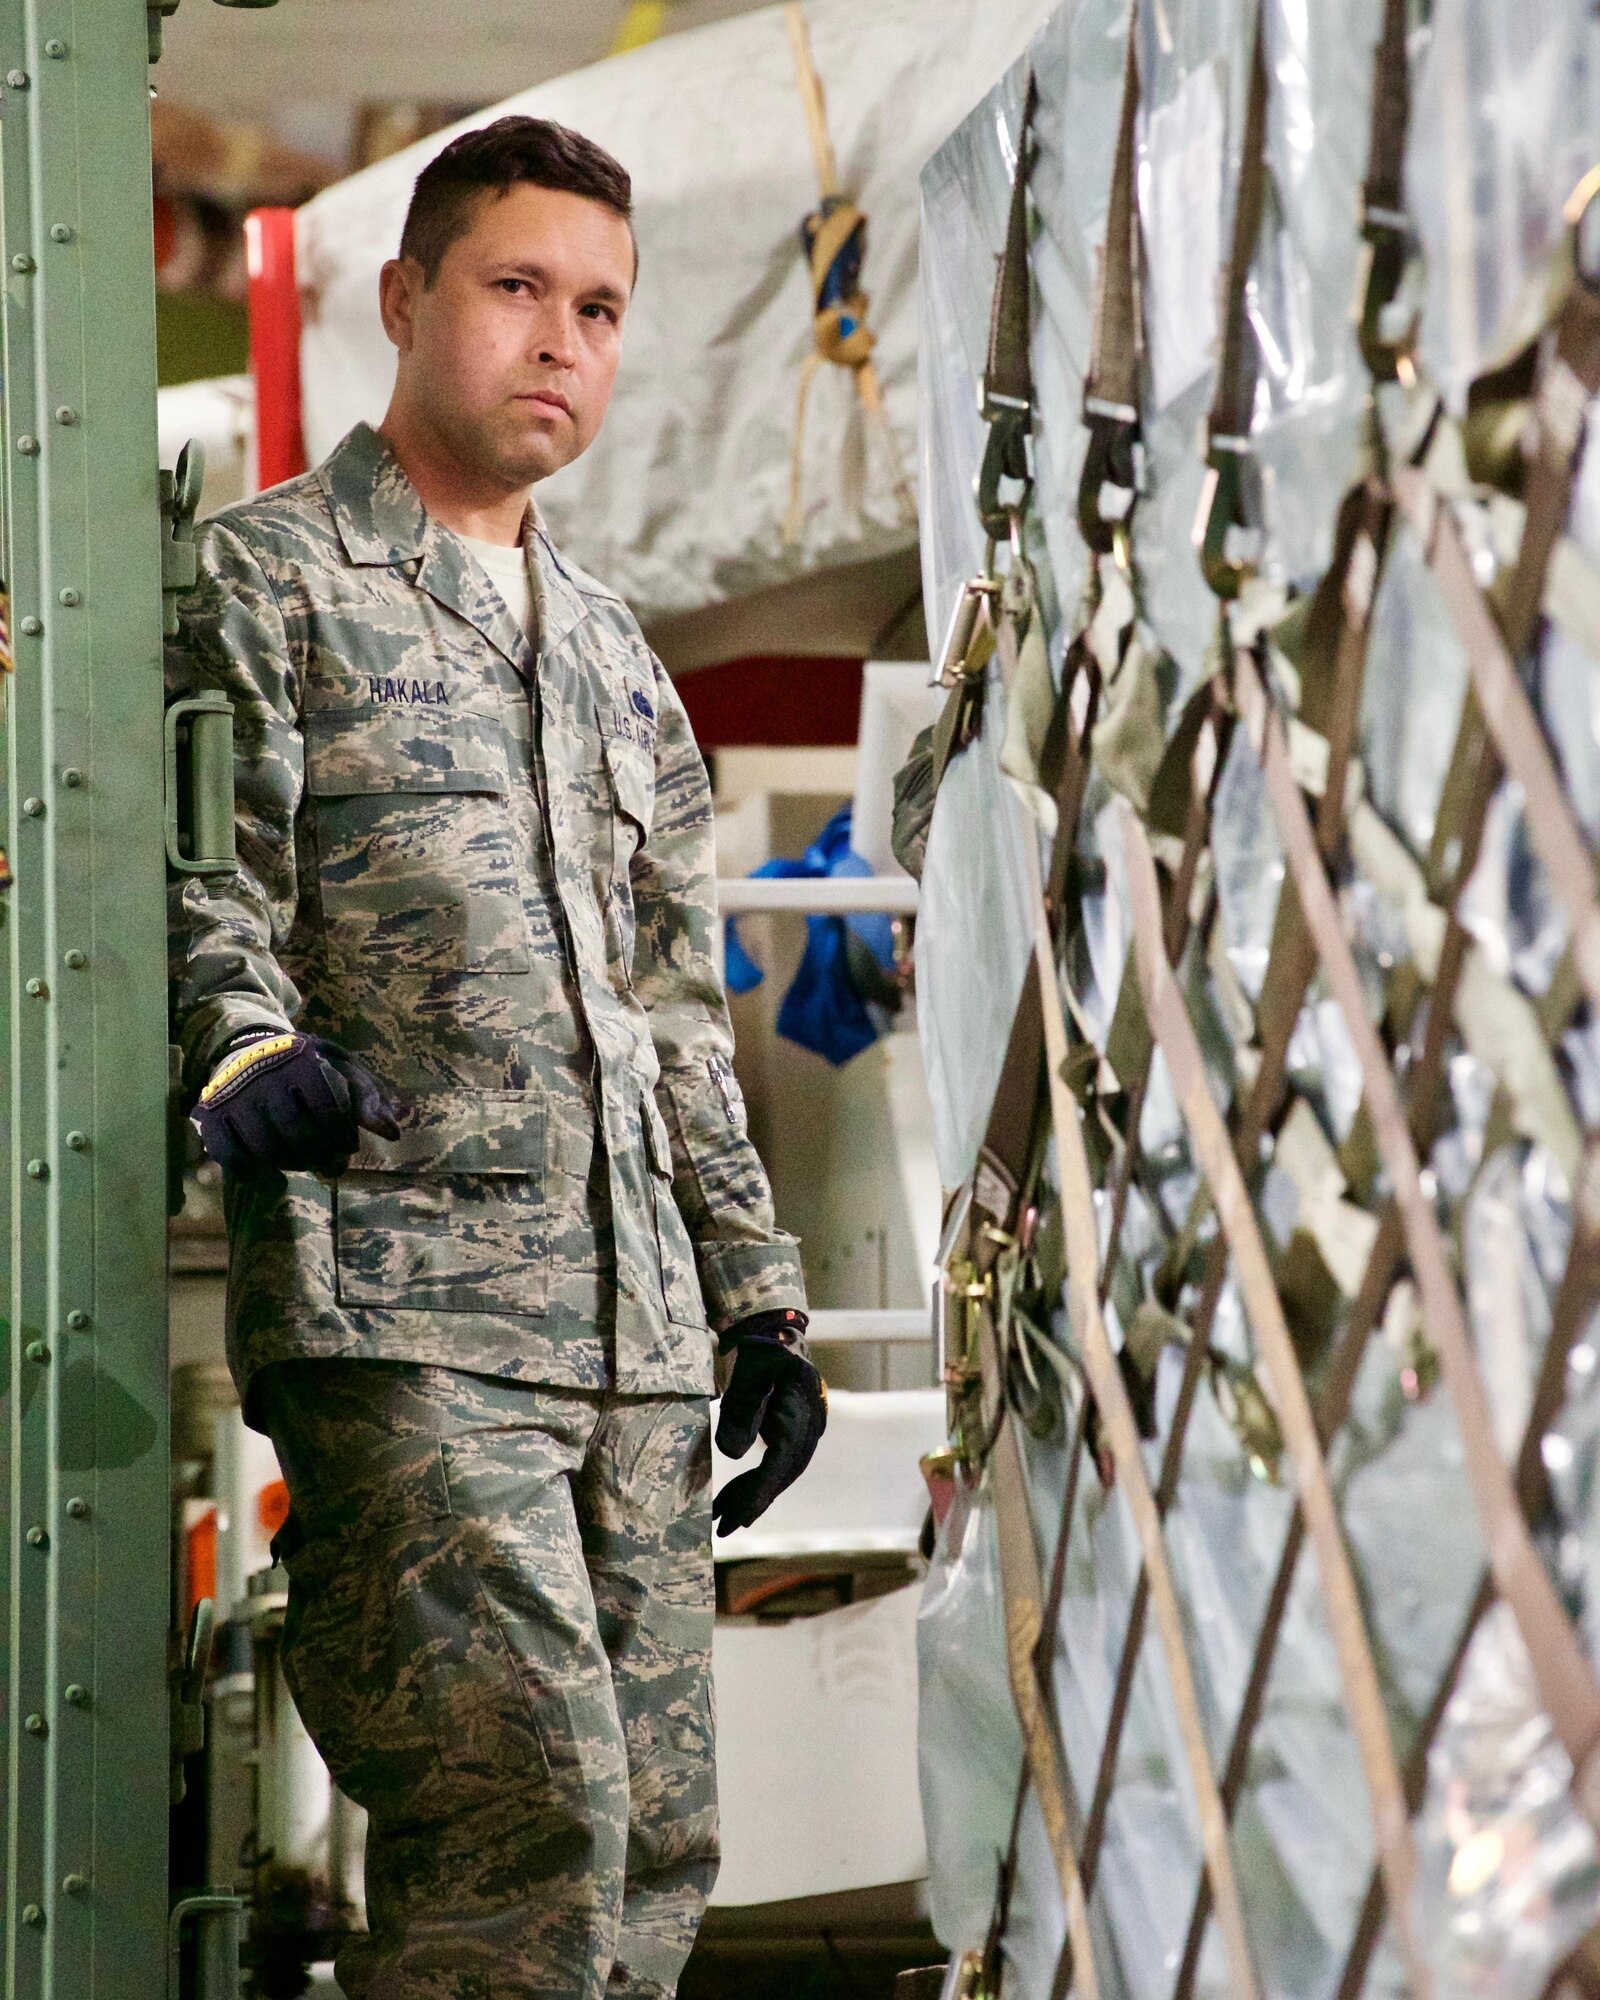 Tech. Sgt. Jesse Hakala, systems administrator, stands ready to push a pallet while unloading cargo after arriving at Clark Air Base, Philippines, Jan. 14, 2017. The cargo contains the components of ground-based commercial satellite imagery system named Eagle Vision. Hakala and approximately 15 other U.S. Airmen and Soldiers deployed to the Philippines to support a Pacific Air Forces Subject Matter Expert Exchange with the Philippine Air Force. The two-week long SMEE will concentrate on how Eagle Vision, and satellite imagery, can enhance the two nation's Humanitarian Assistance and Disaster Relief capabilities. (U.S. Air Force photo by Tech. Sgt. James Stewart/Released)